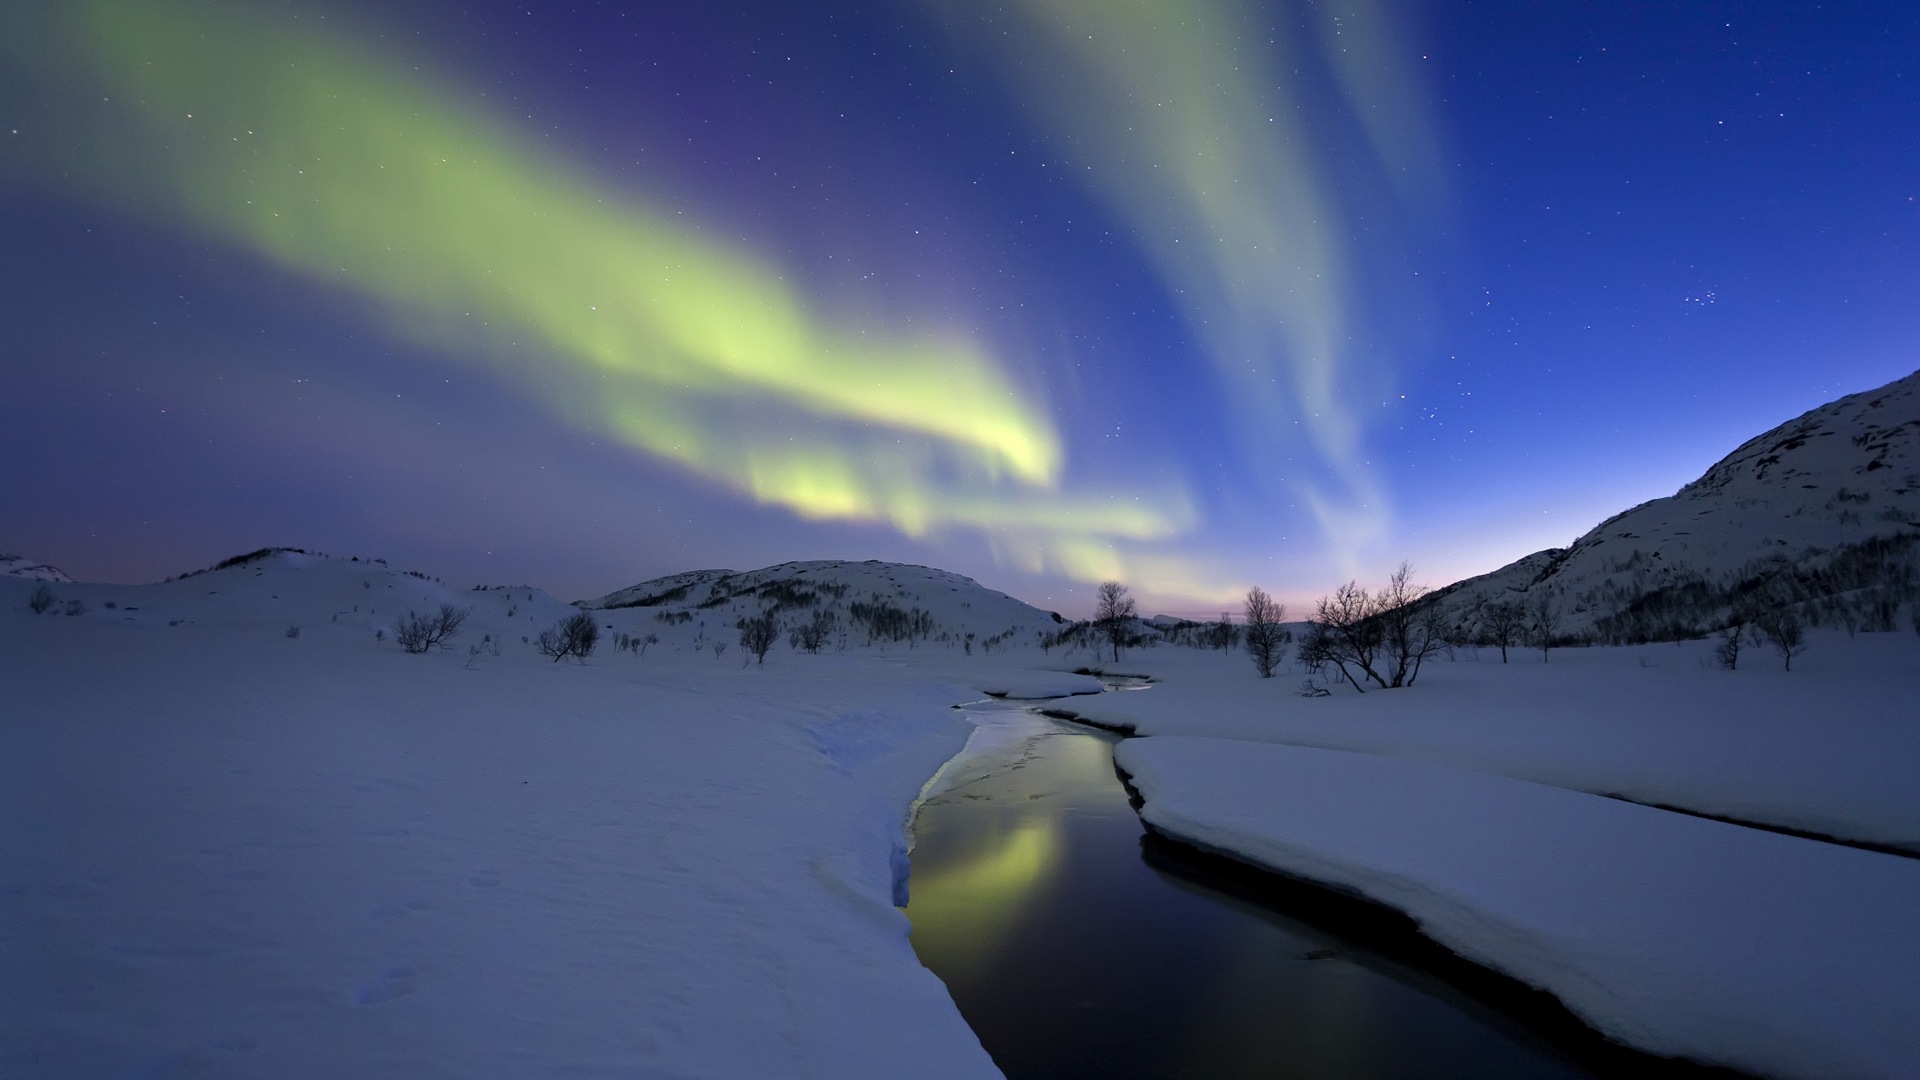 Natural wonders of the Northern Lights HD Wallpaper (2) #19 - 1920x1080